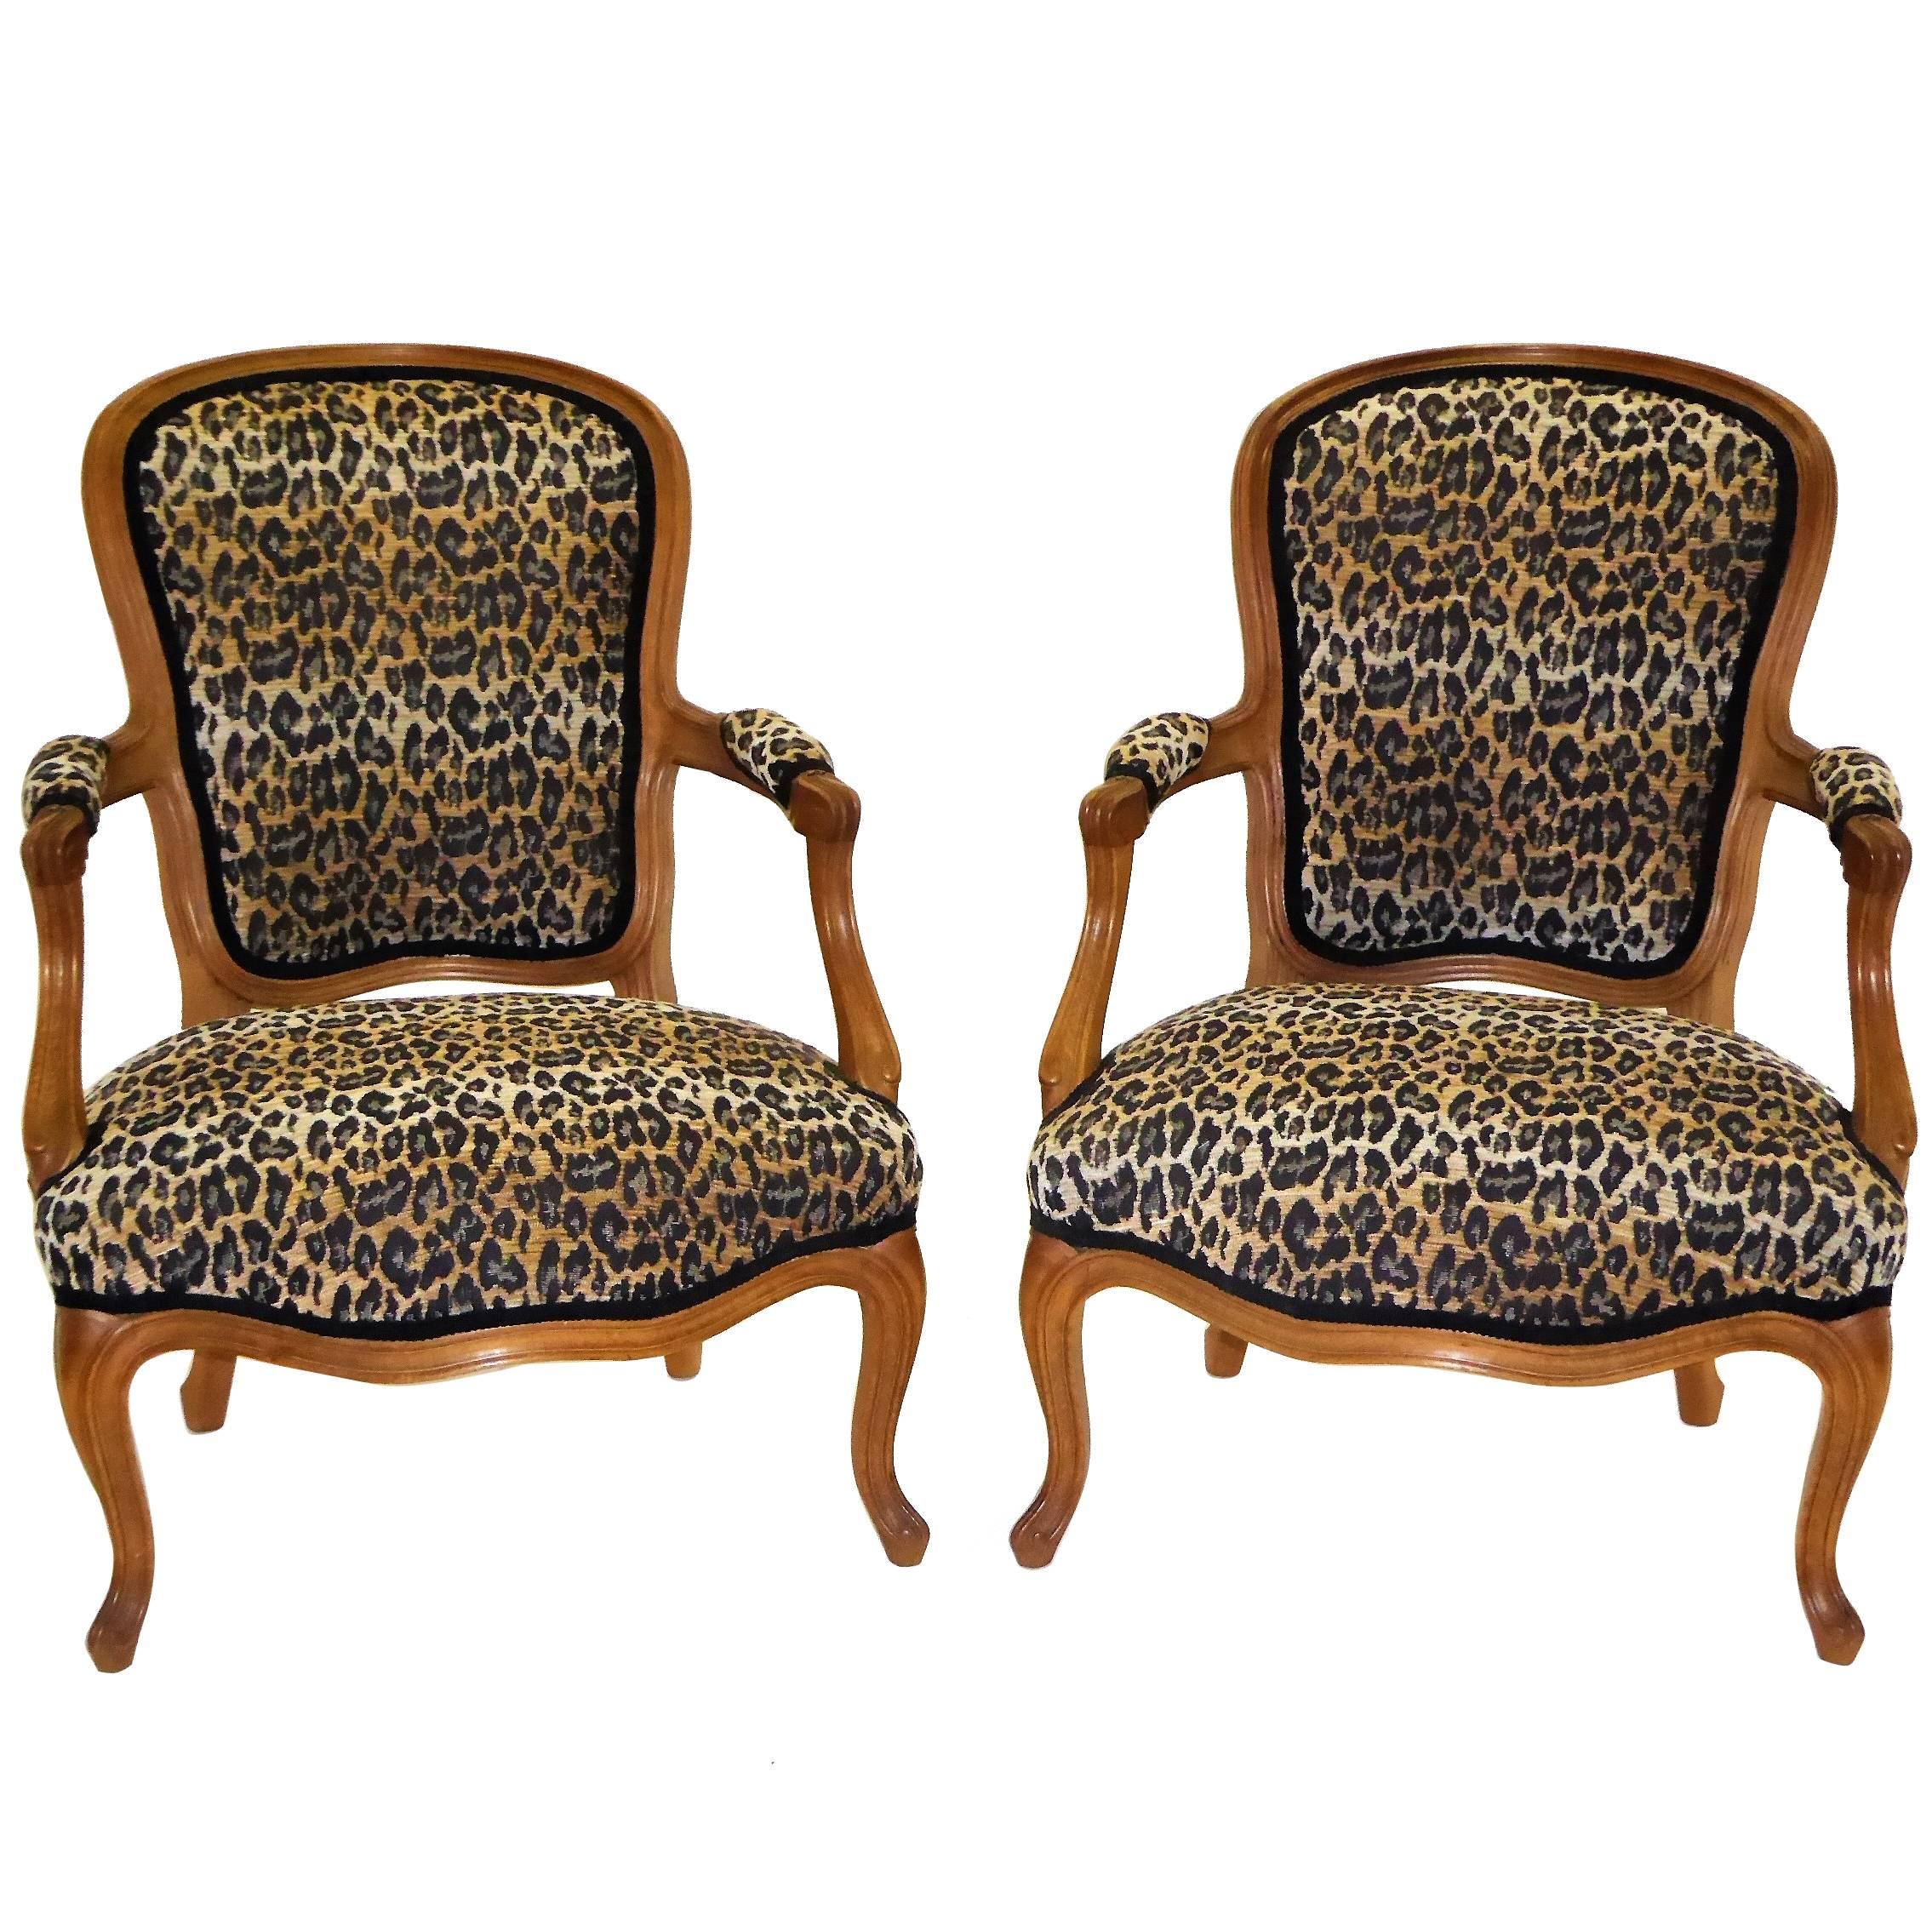  Pair of Louis XV Style Chauffeuses or Fauteuils by Saridis in Leopard Chenille 